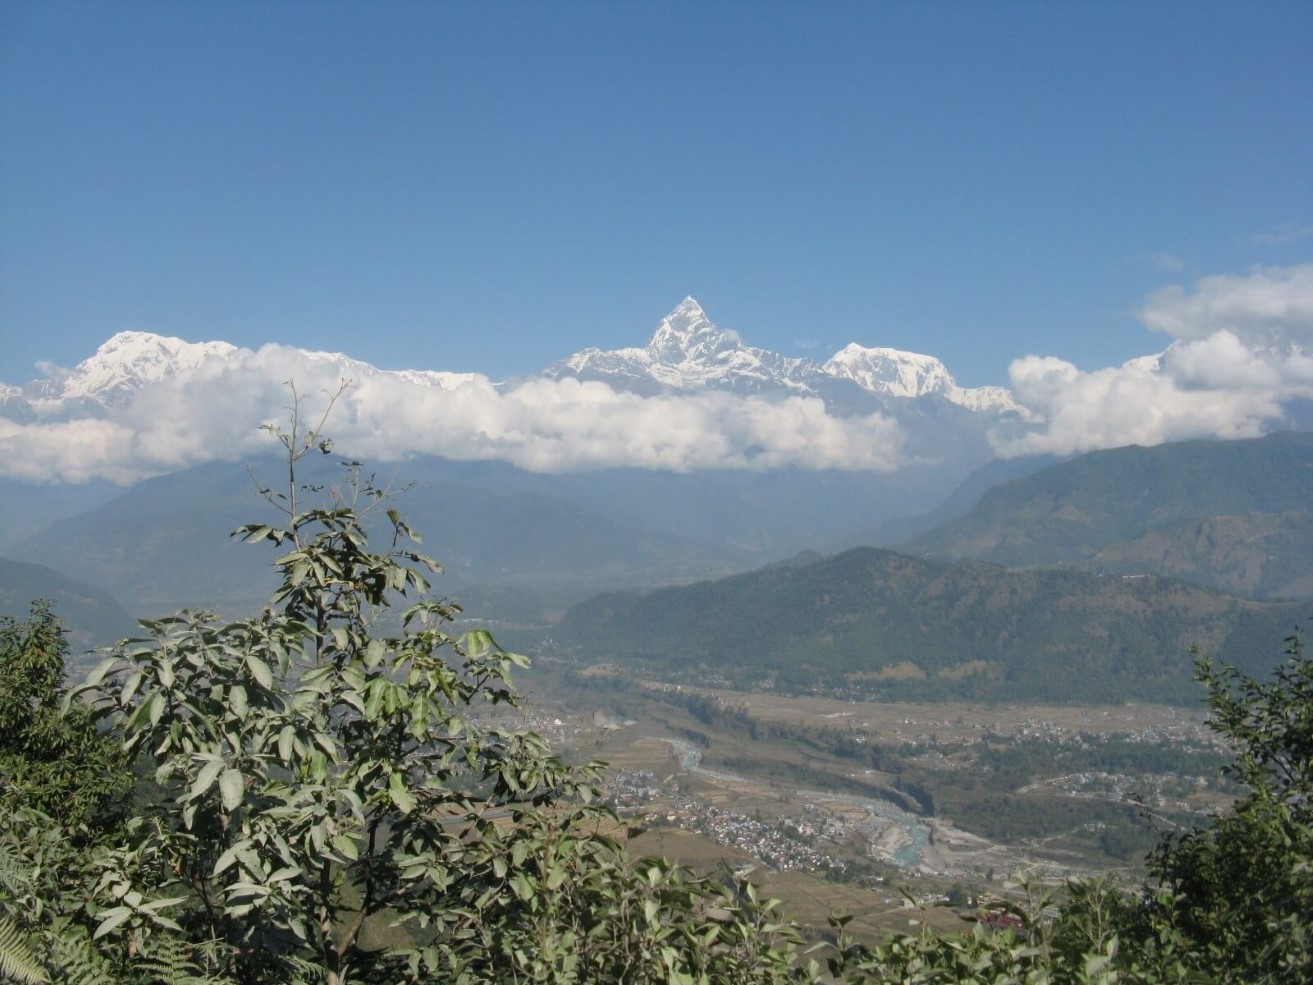 Mt. Fishtail View from Pokhara City